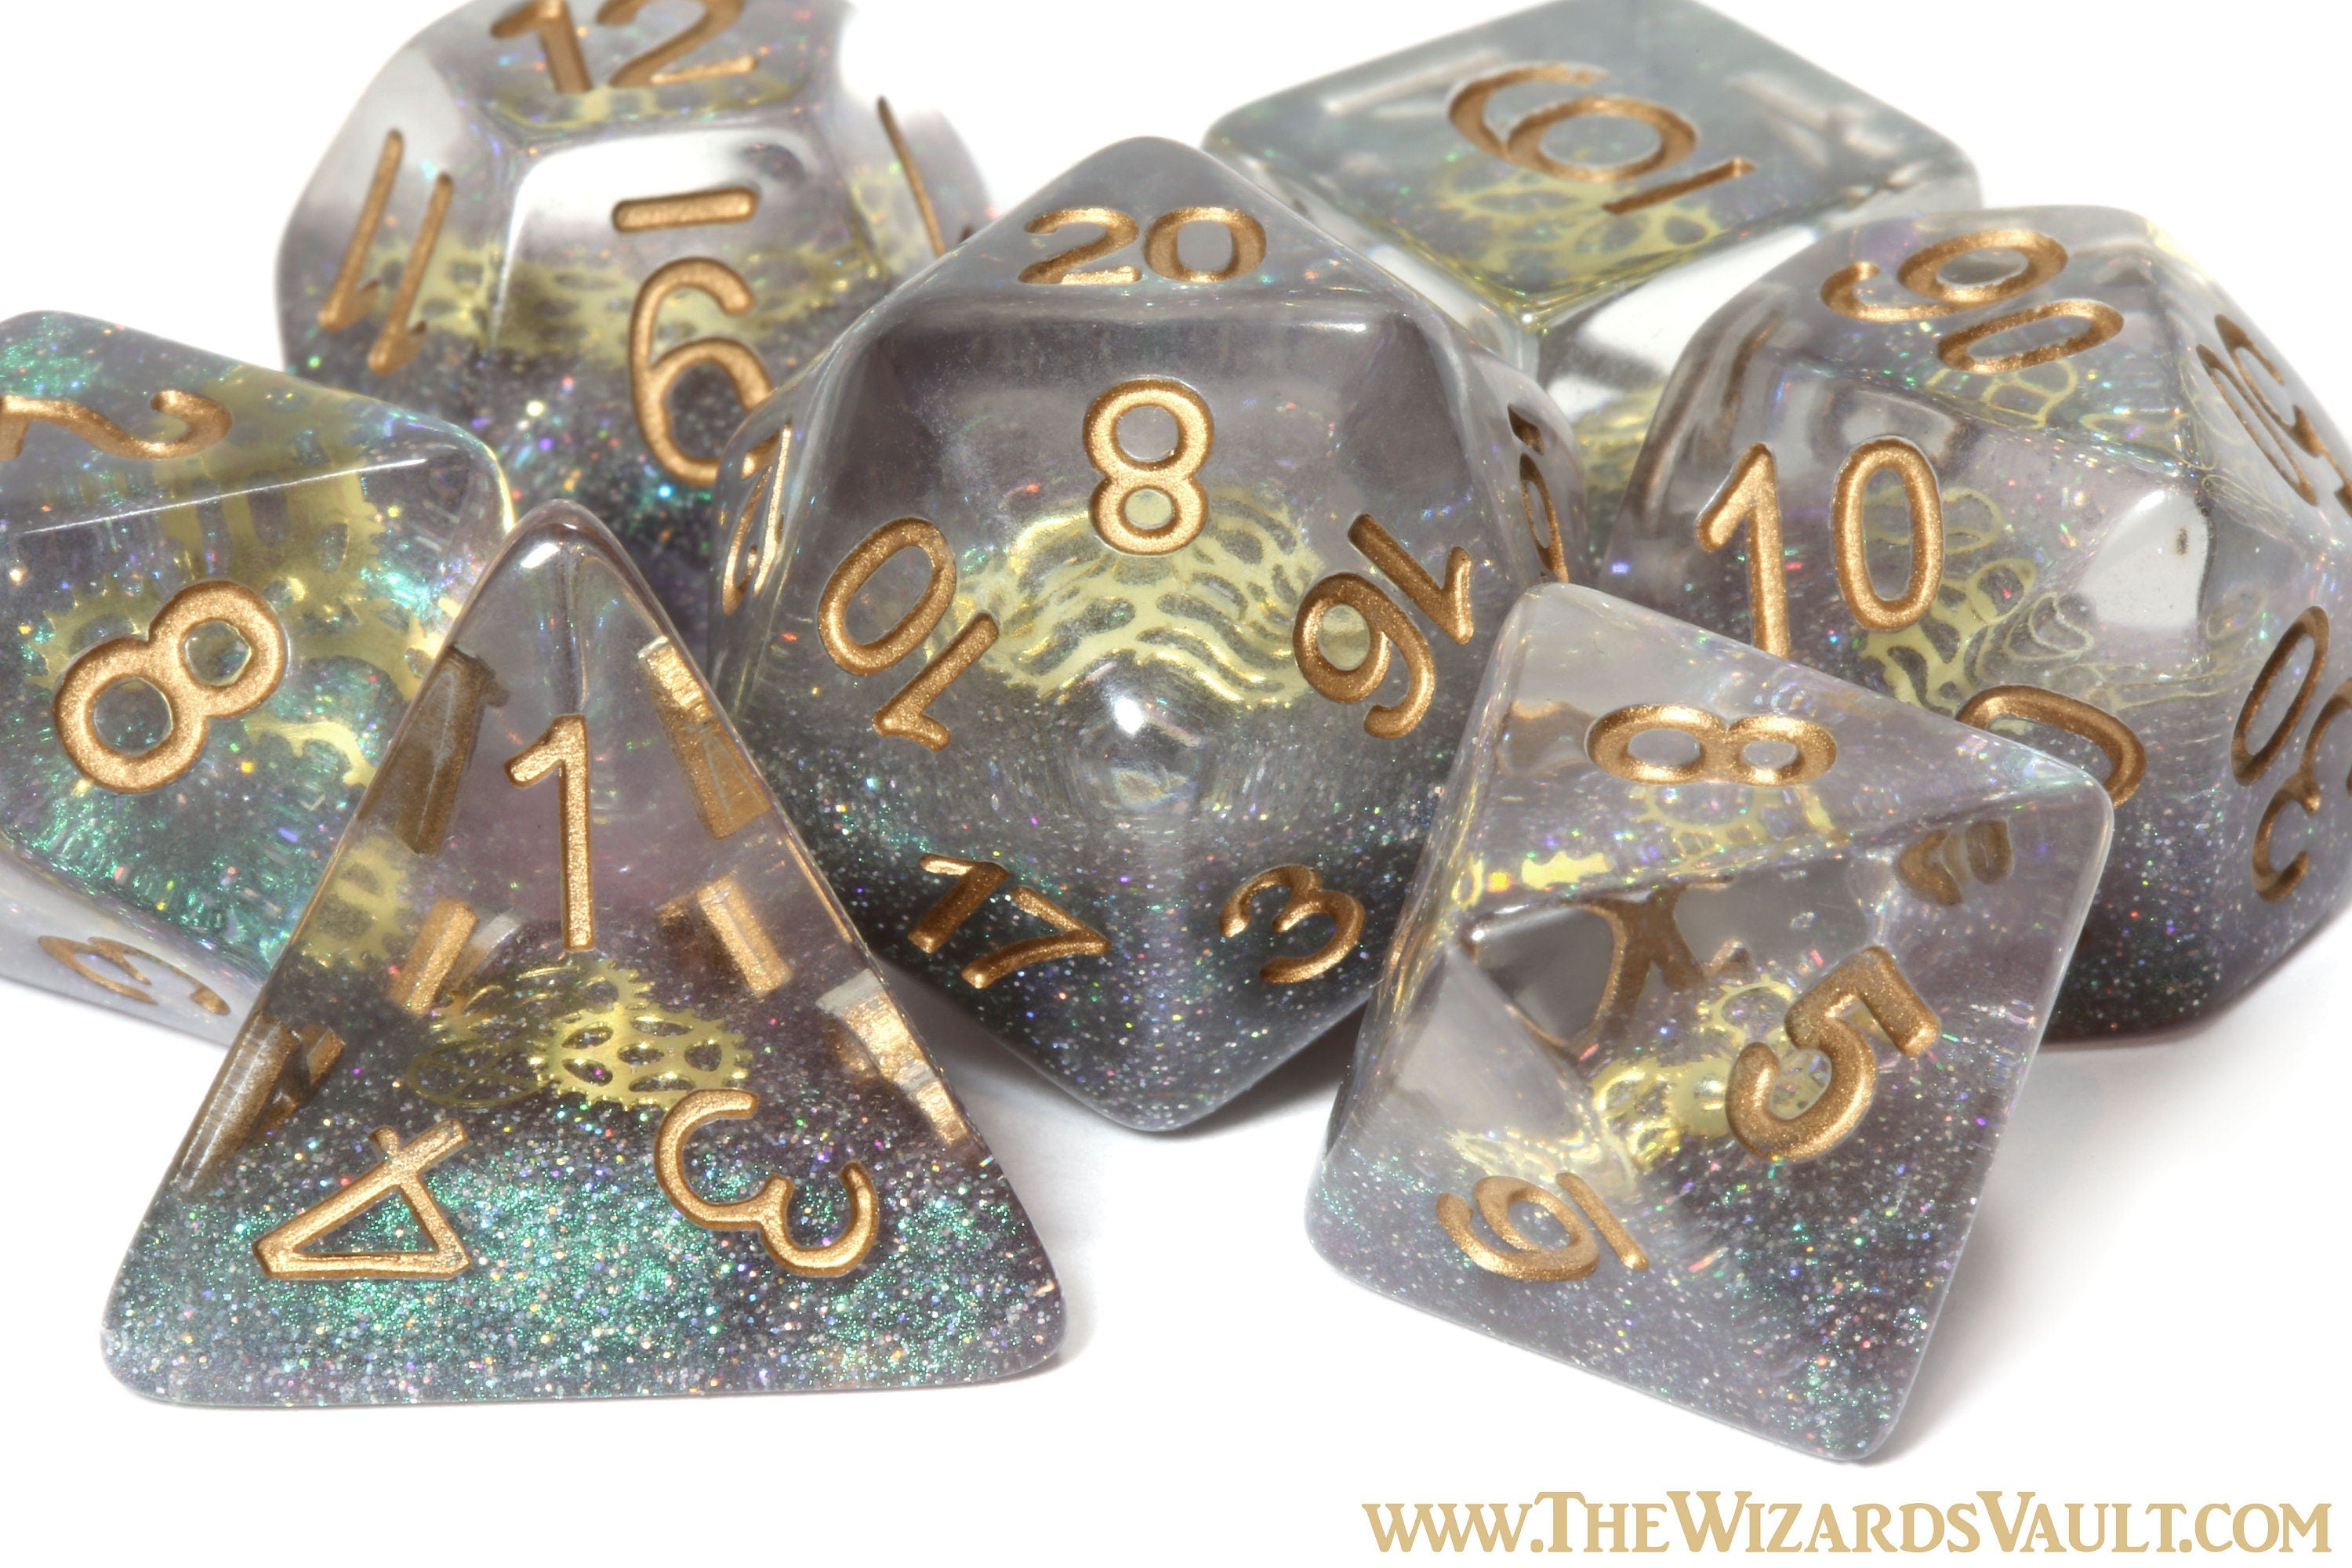 Aether Sprockets DND Dice set with small golden gear - The Wizard's Vault